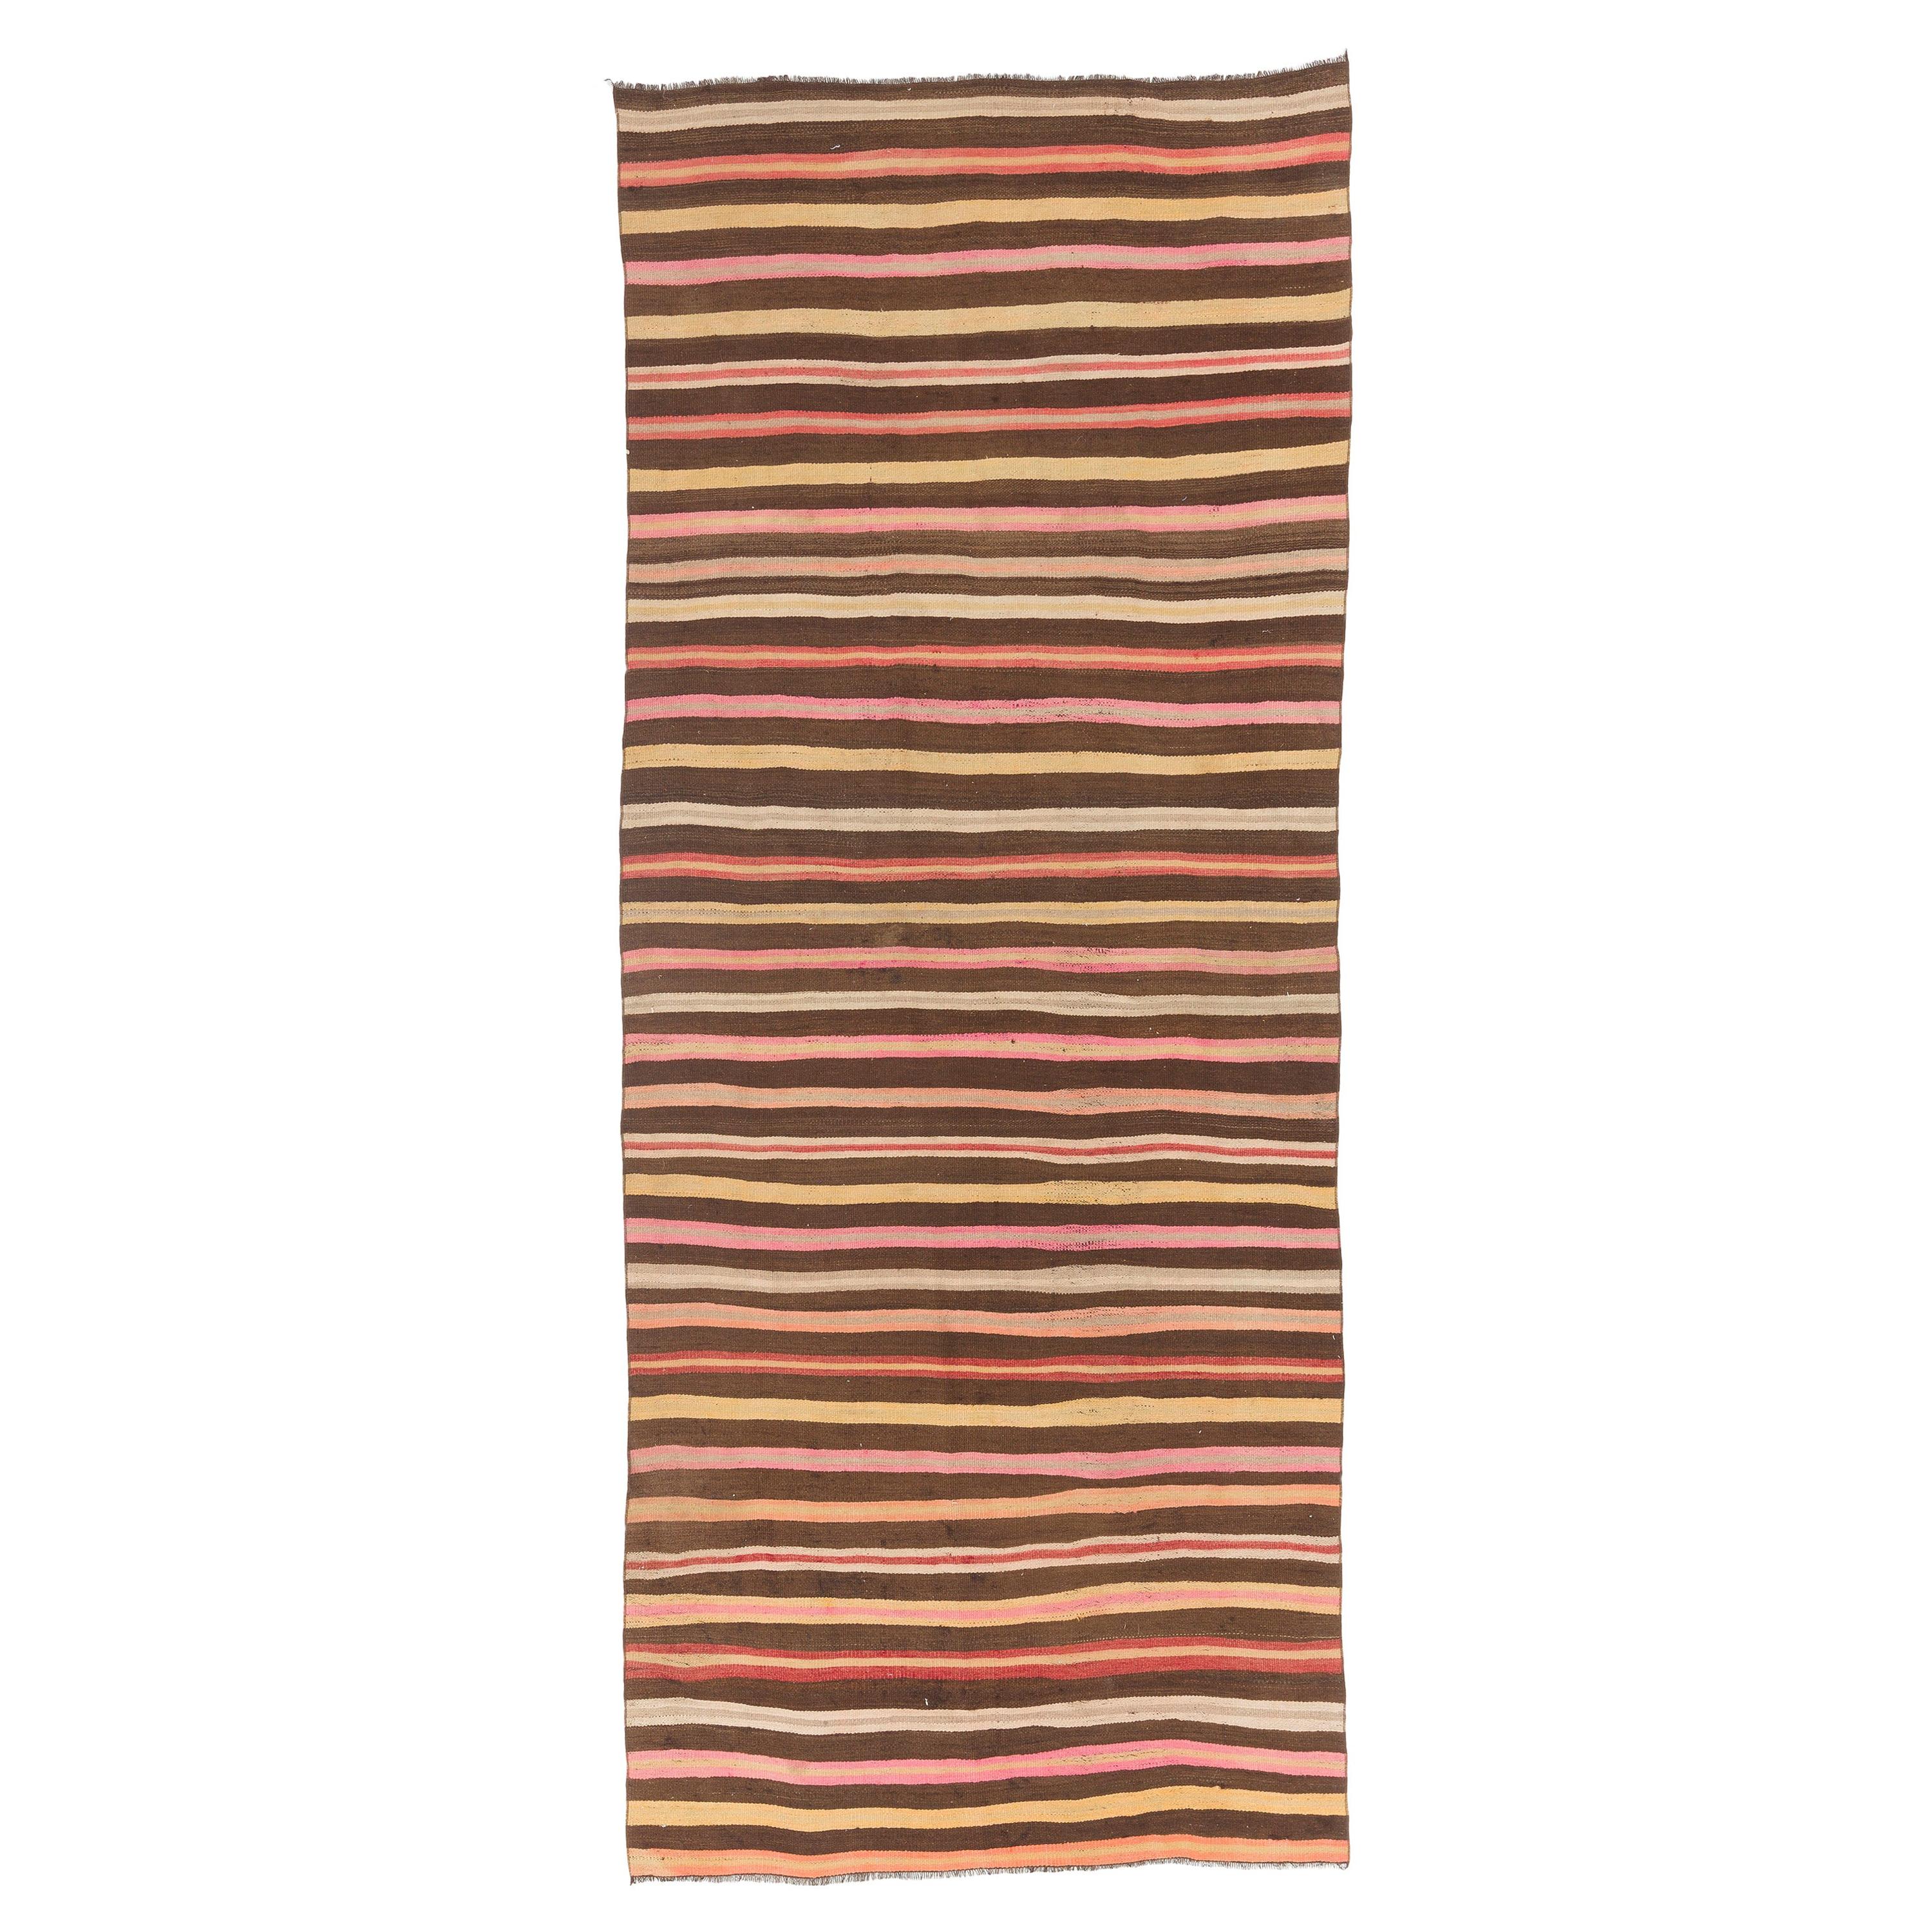 5x11.8 Ft Handmade Kilim Runner with Soft Green, Yellow, Brown and Pink Stripes For Sale